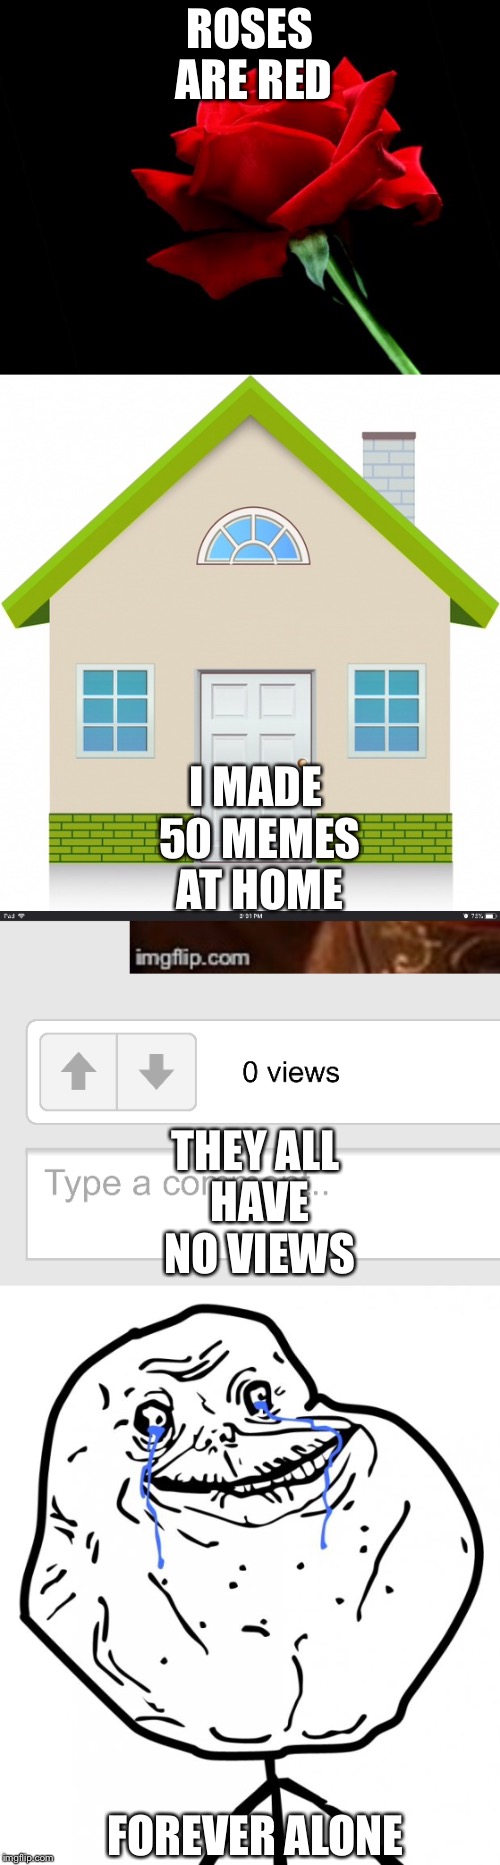 Forever alone | ROSES ARE RED; I MADE 50 MEMES AT HOME; THEY ALL HAVE NO VIEWS; FOREVER ALONE | image tagged in forever alone,memes,roses are red,no views | made w/ Imgflip meme maker